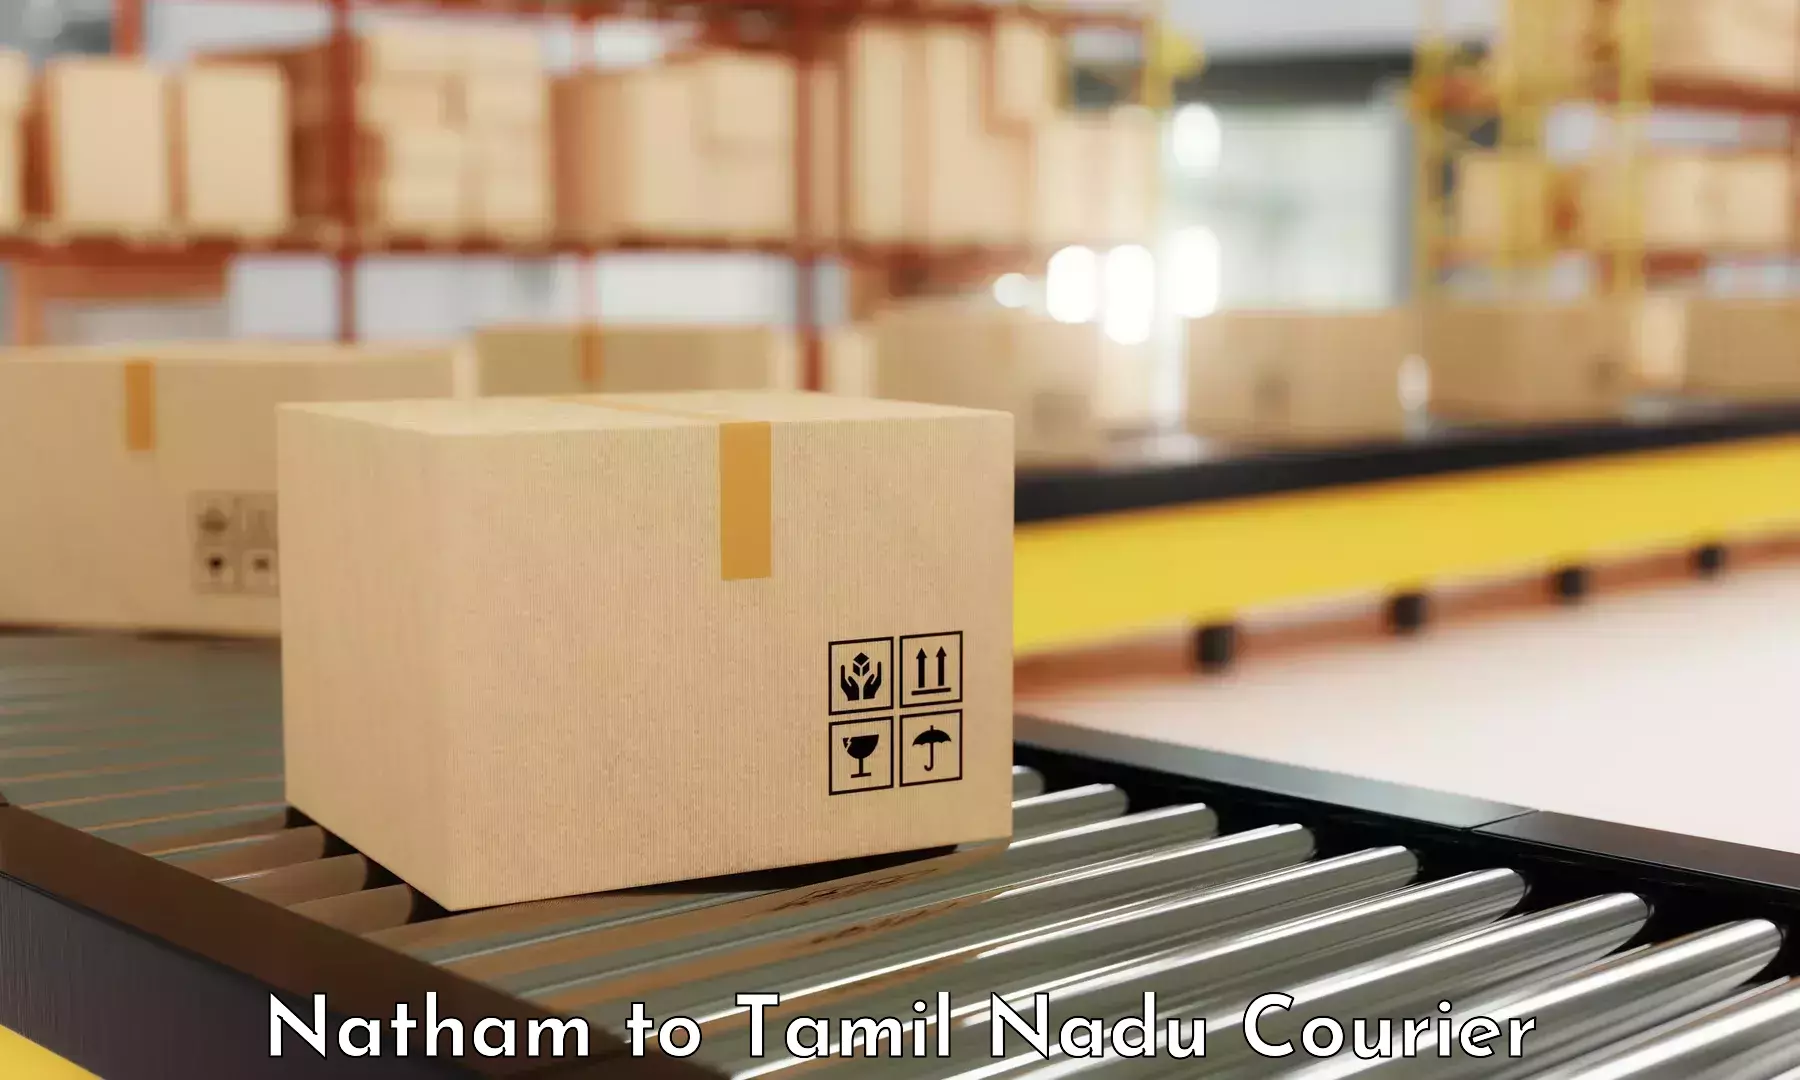 Efficient order fulfillment in Natham to Suramangalam